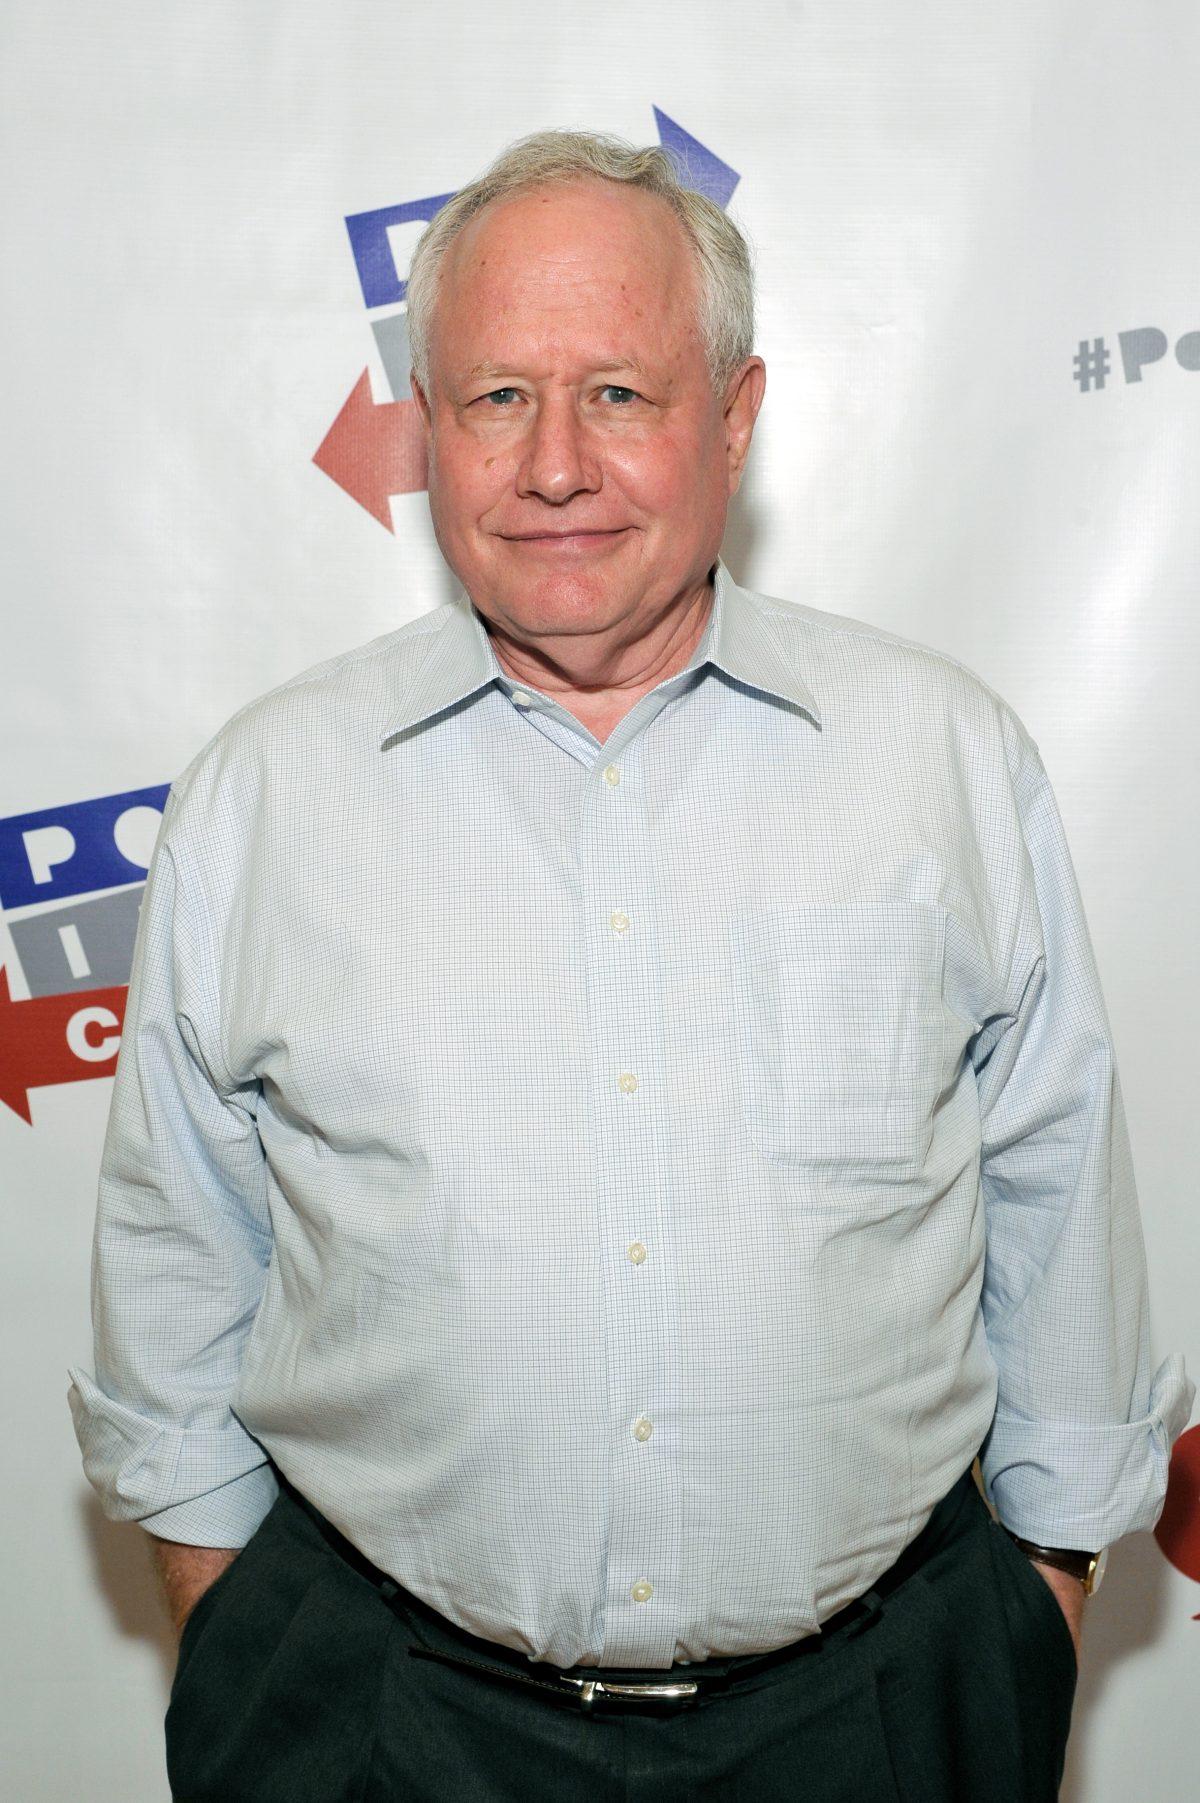 William Kristol at Politicon at the Pasadena Convention Center in Pasadena, Calif. on July 30, 2017. (John Sciulli/Getty Images for Politicon)